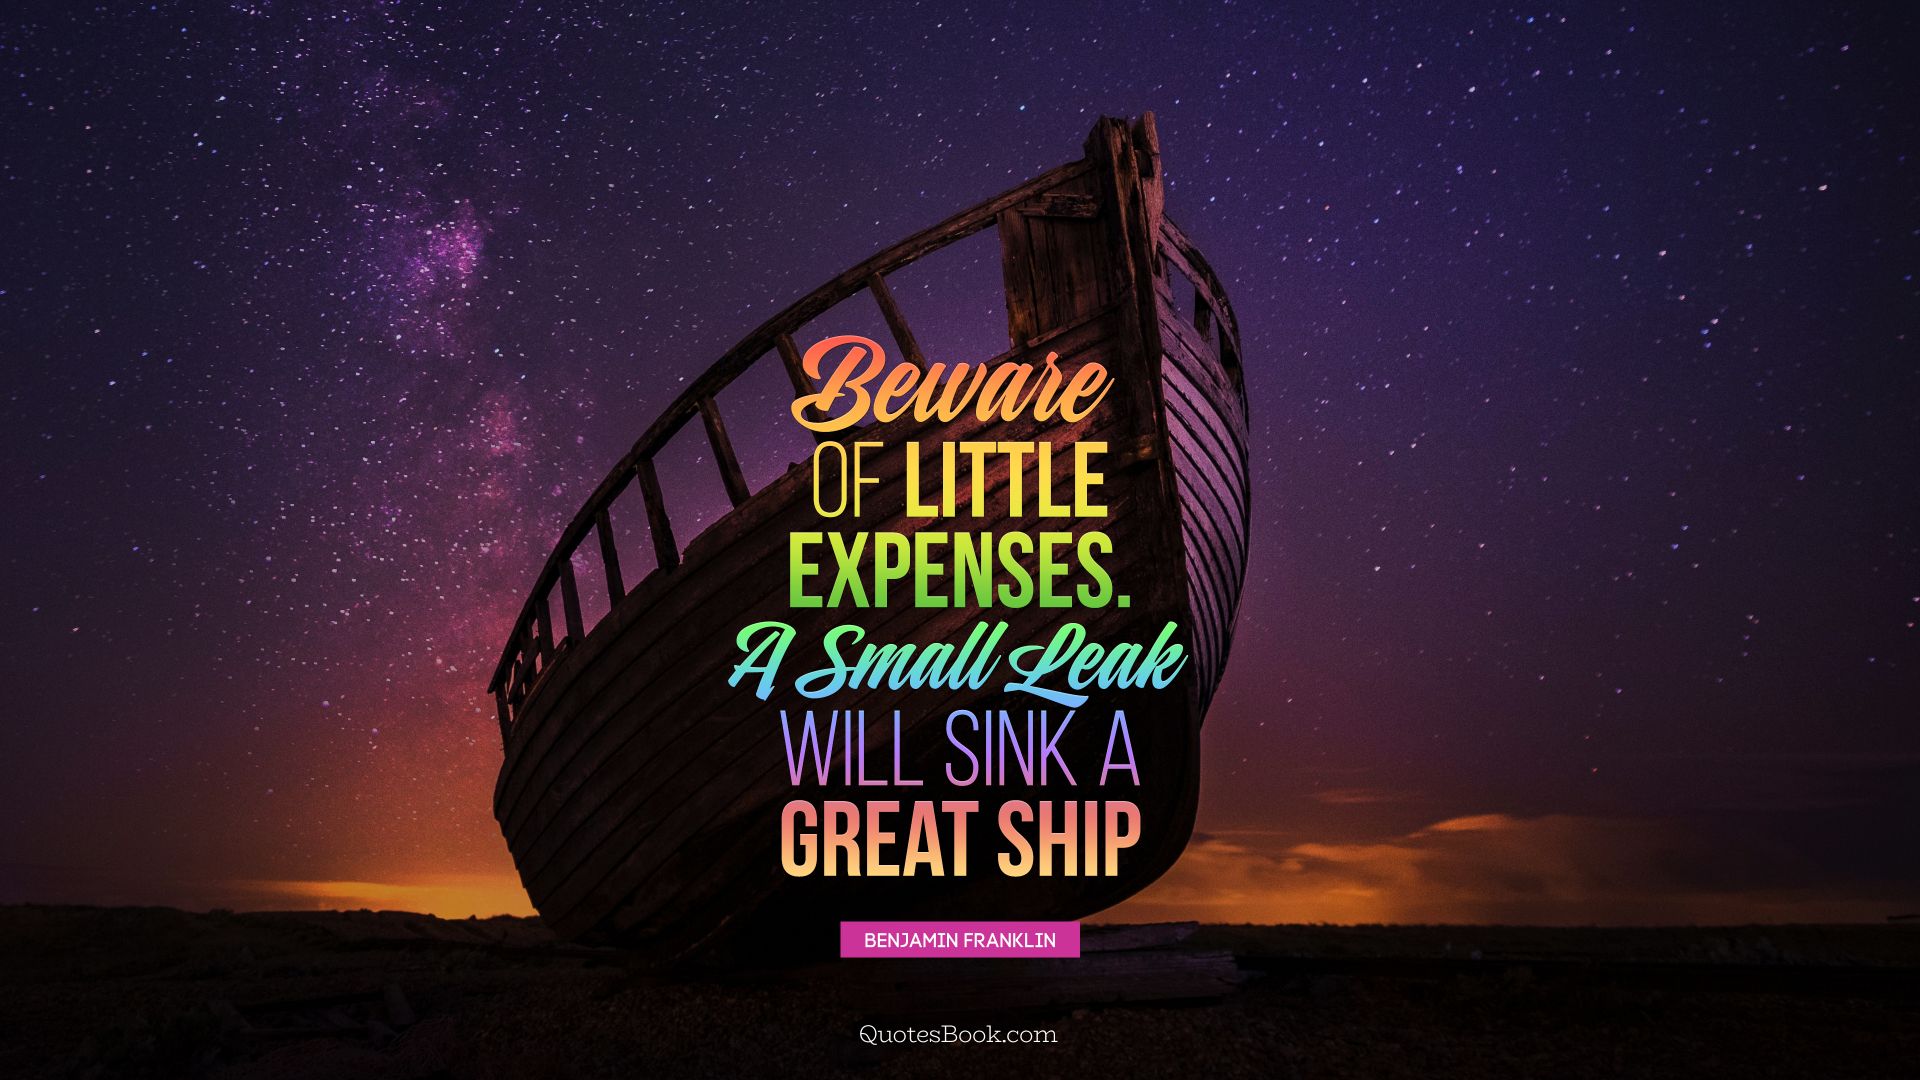 Beware of little expenses. A small leak will sink a great ship. - Quote by Benjamin Franklin